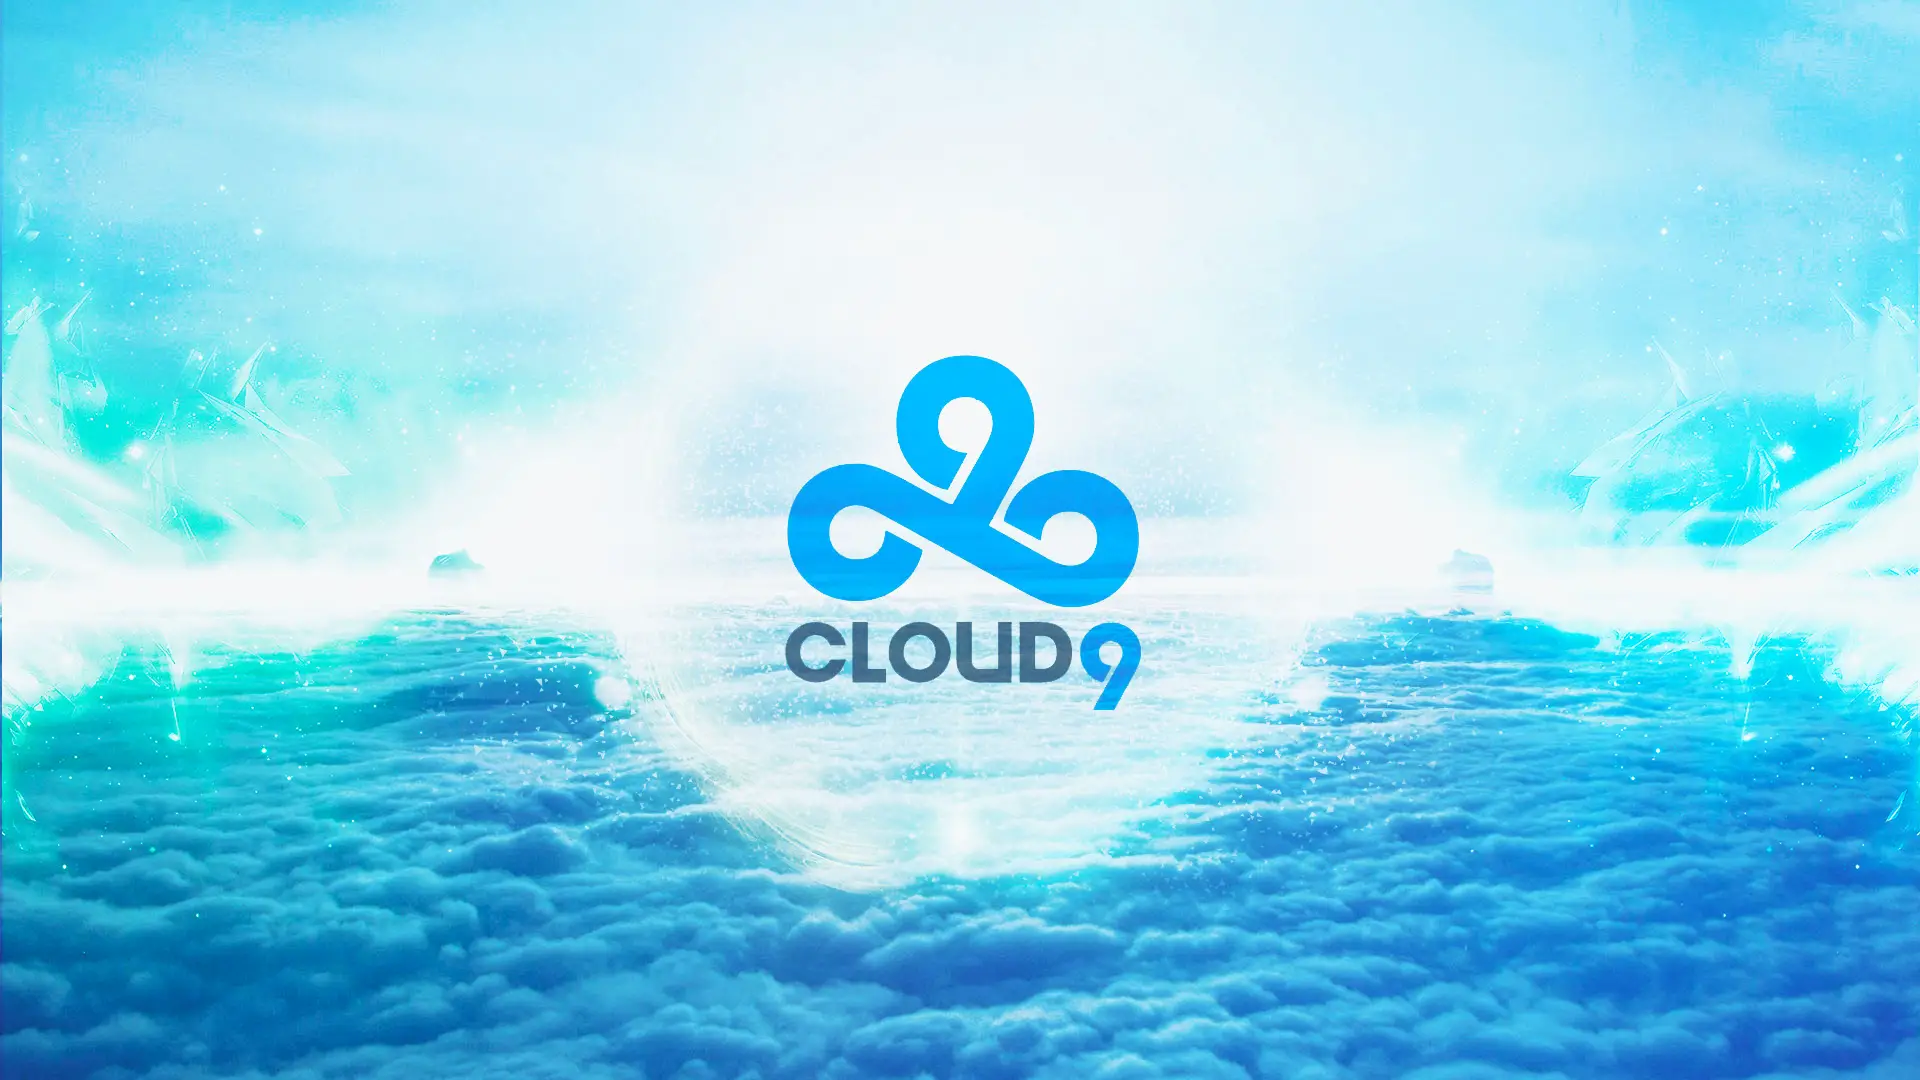 25 Cloud9 Wallpapers - BC-GB